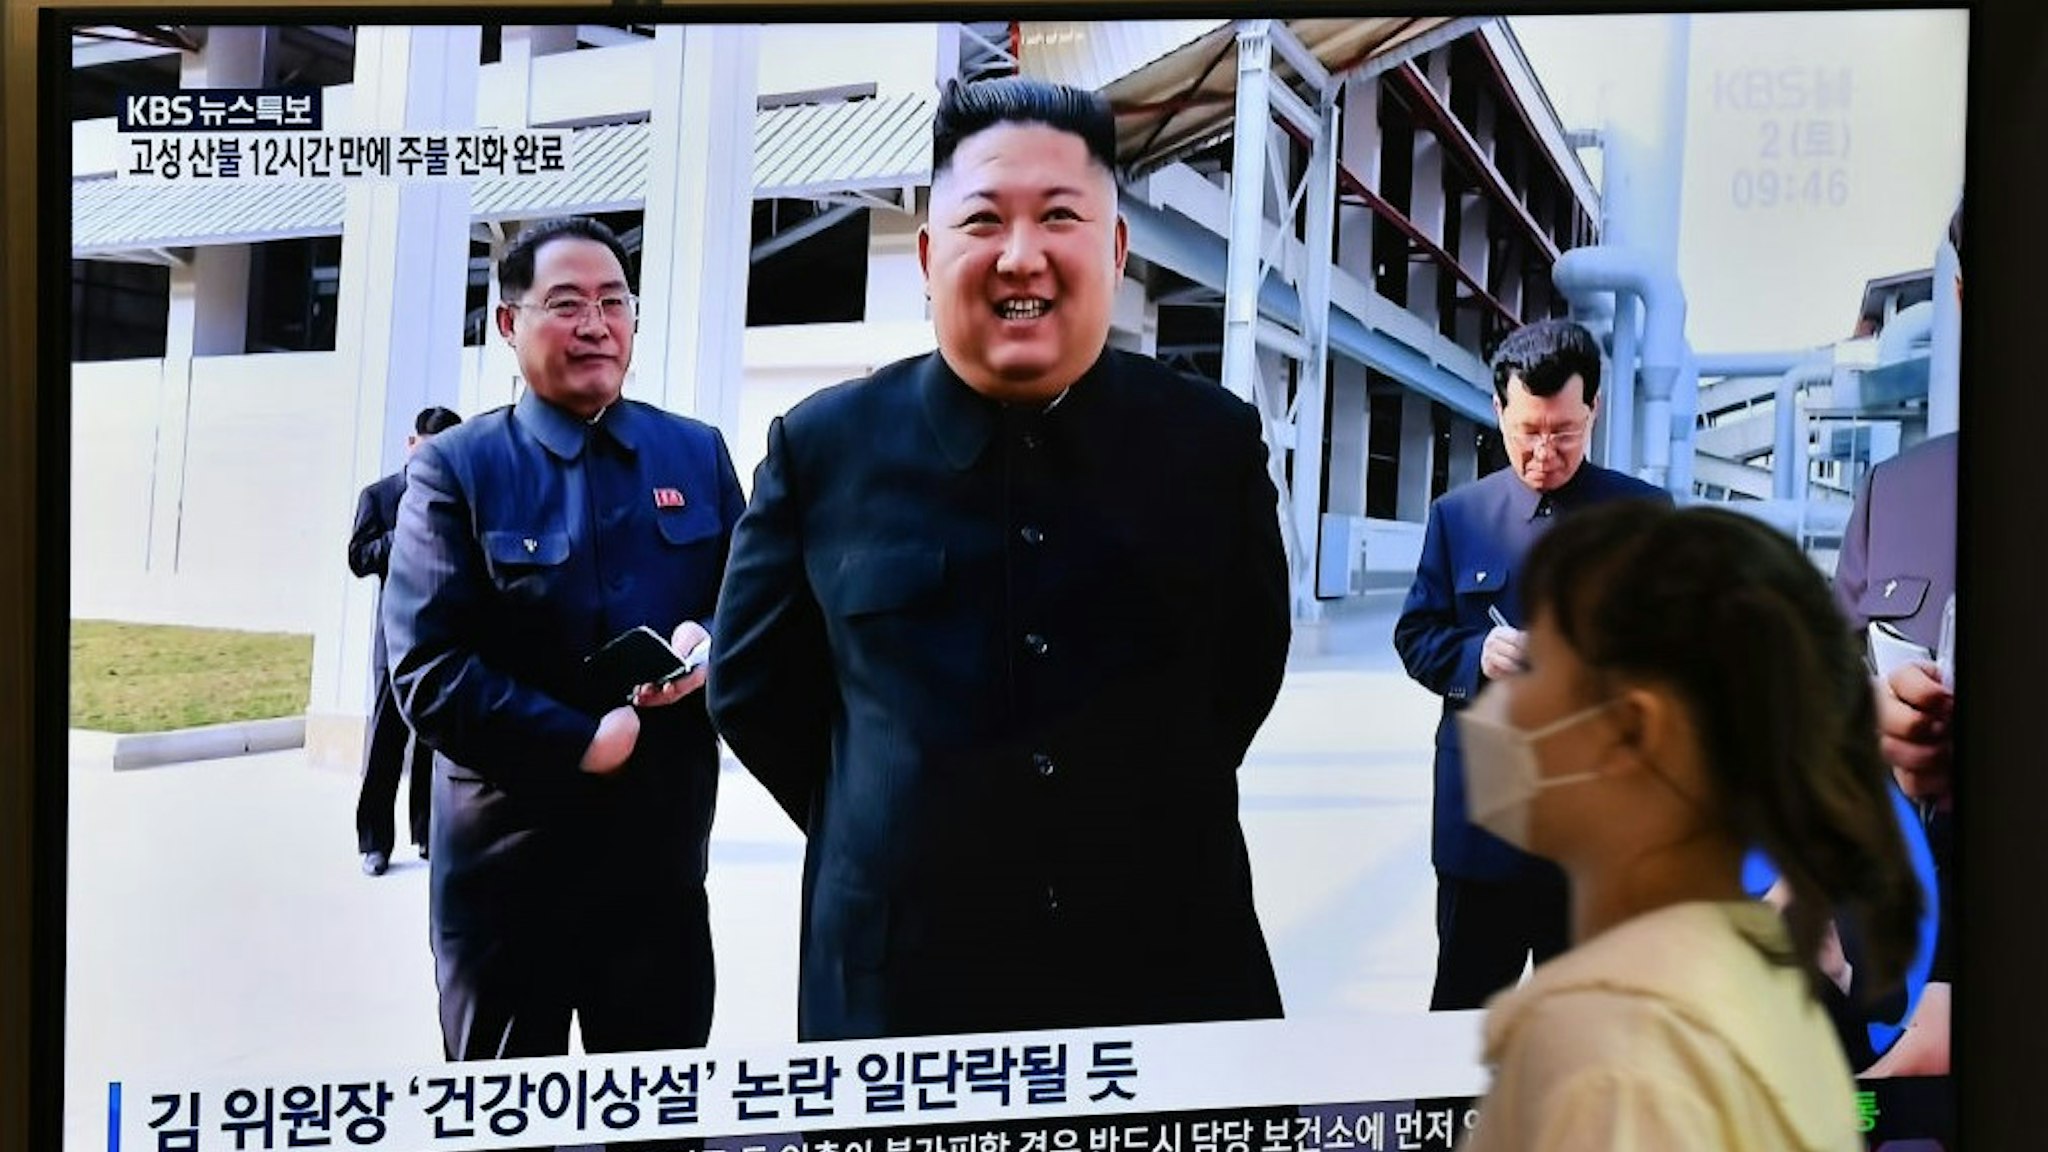 TOPSHOT - A woman walks past a television news screen showing a picture of North Korean leader Kim Jong Un attending a ceremony to mark the completion of Sunchon phosphatic fertiliser factory, at a railway station in Seoul on May 2, 2020. - North Korea's Kim Jong Un has made his first public appearance in nearly three weeks, state media reported on May 2, following intense speculation that the leader of the nuclear-armed nation was seriously ill or possibly dead. (Photo by Jung Yeon-je / AFP) (Photo by